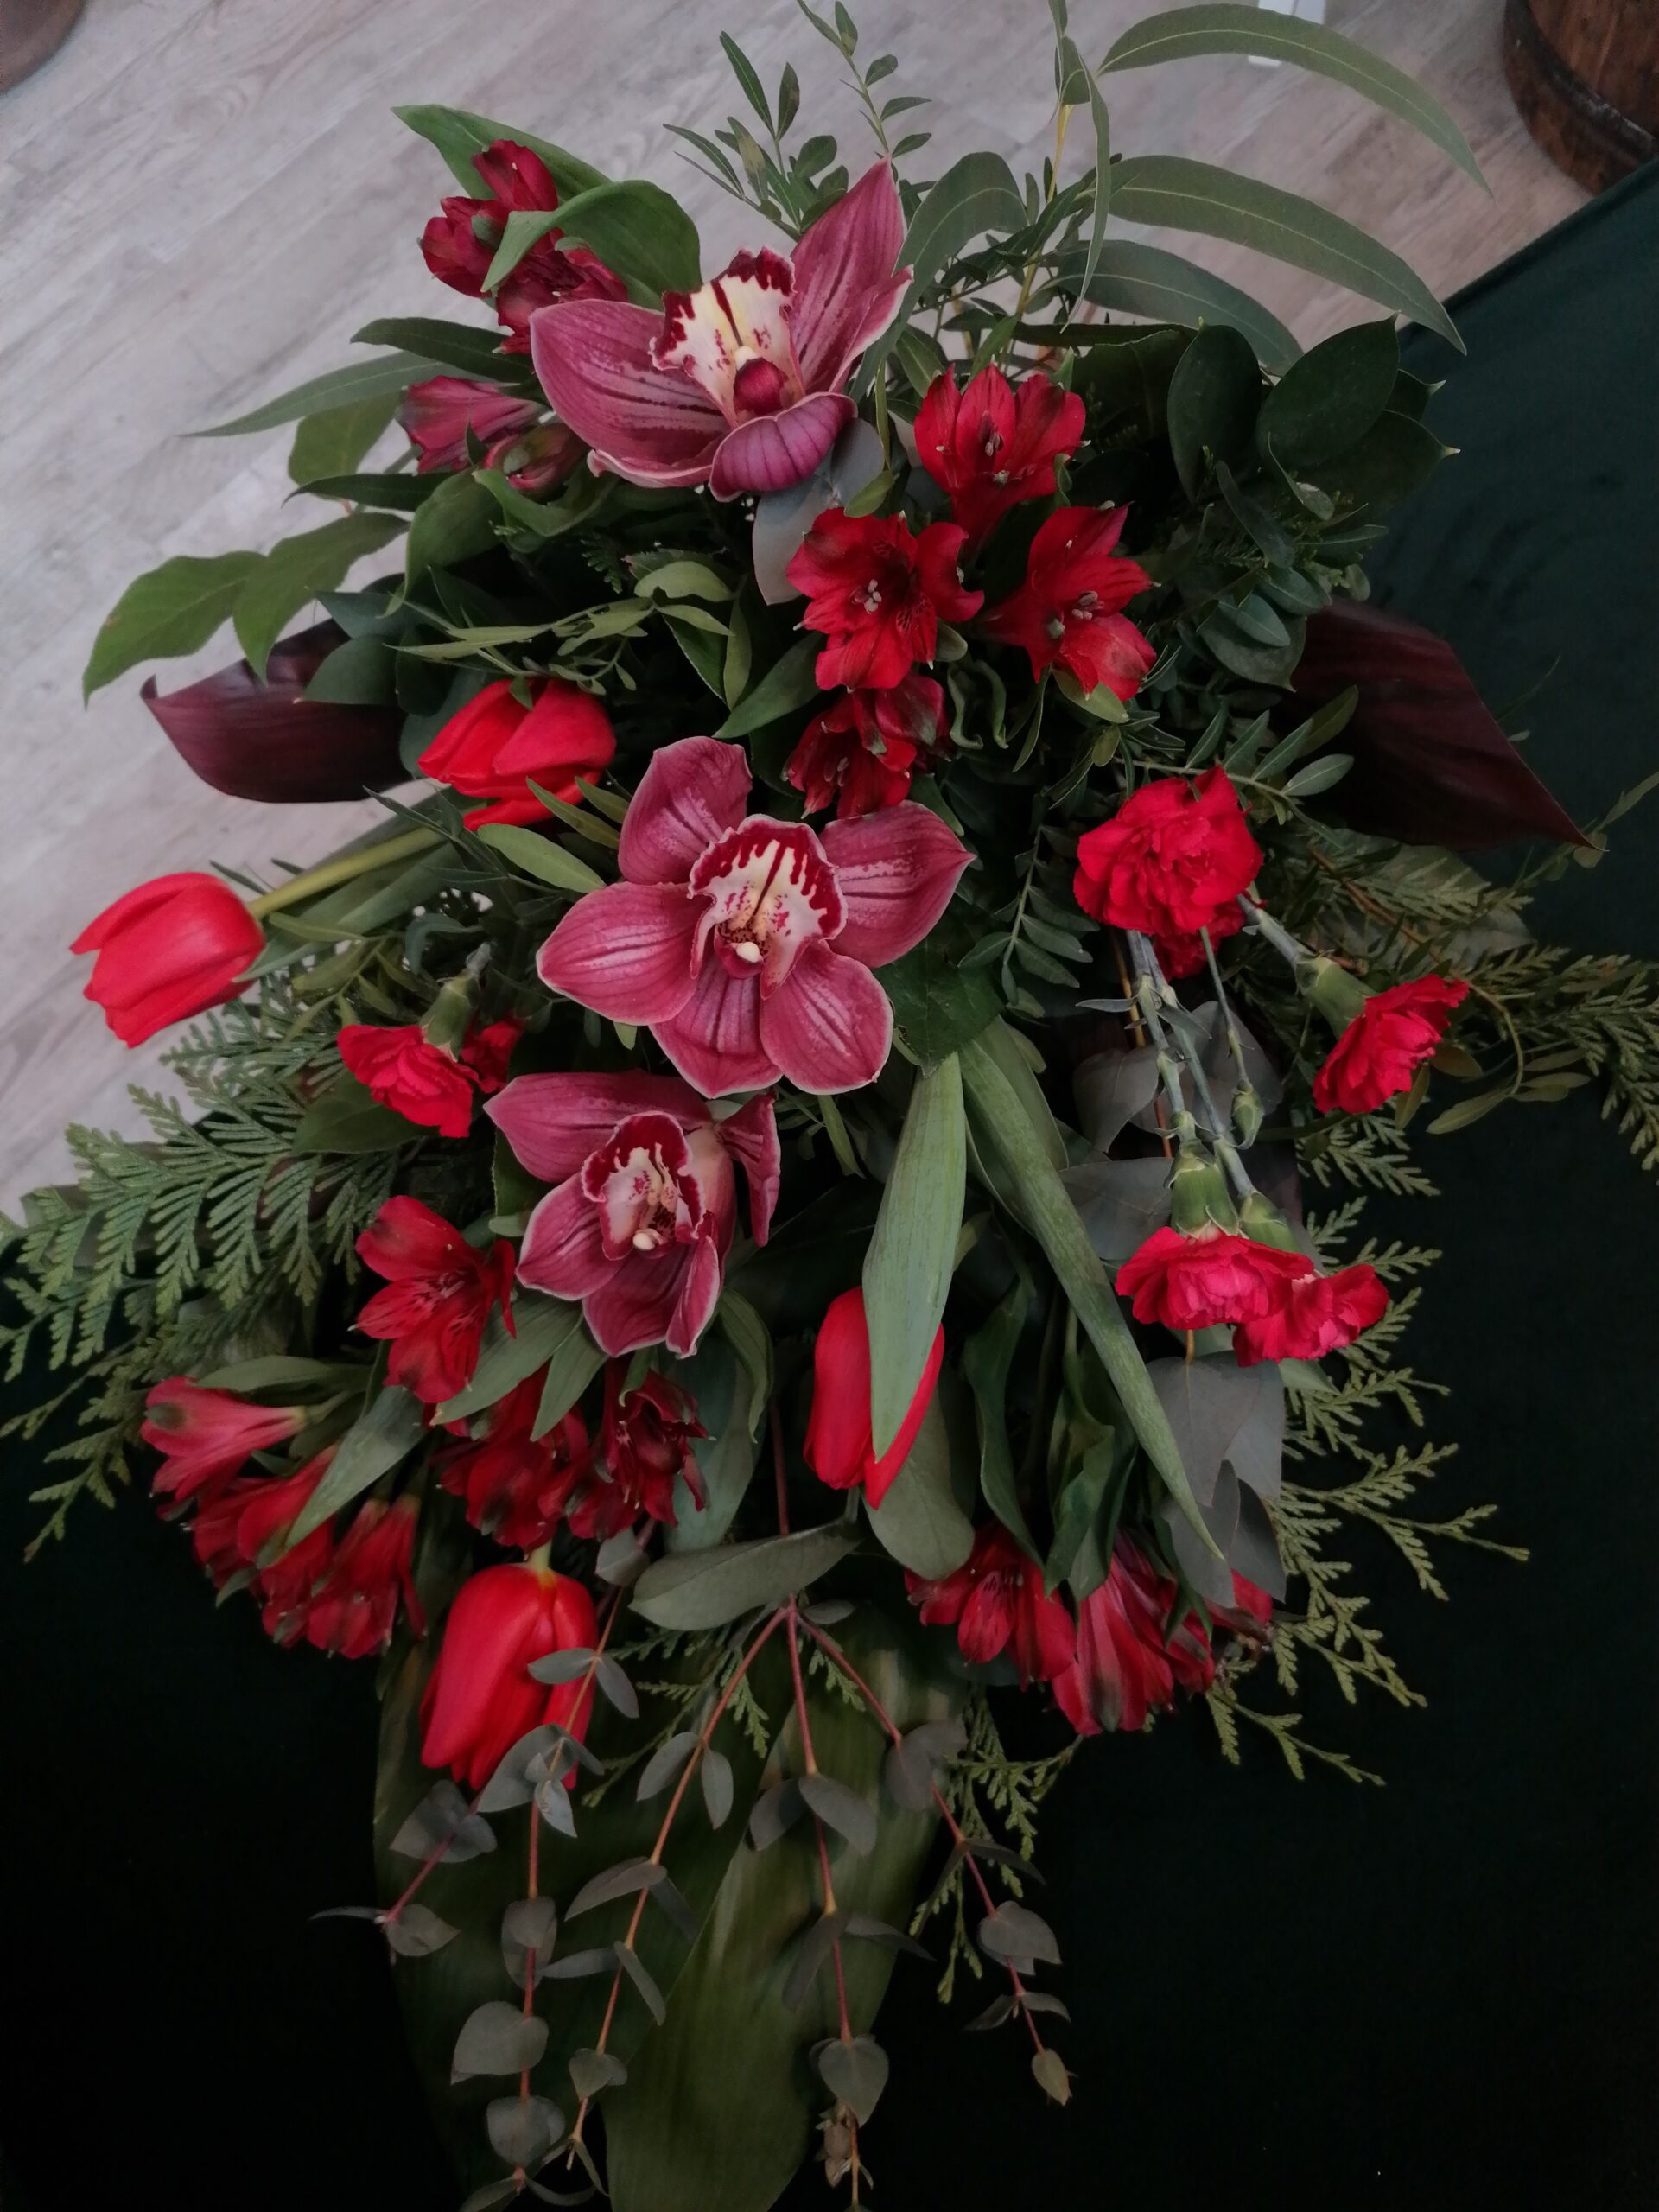 The bouquet in red is an elegant farewell bouquet for both men and women. It consists of orchids, tulips, alstroemeria and carnations surrounded by assorted greenery.